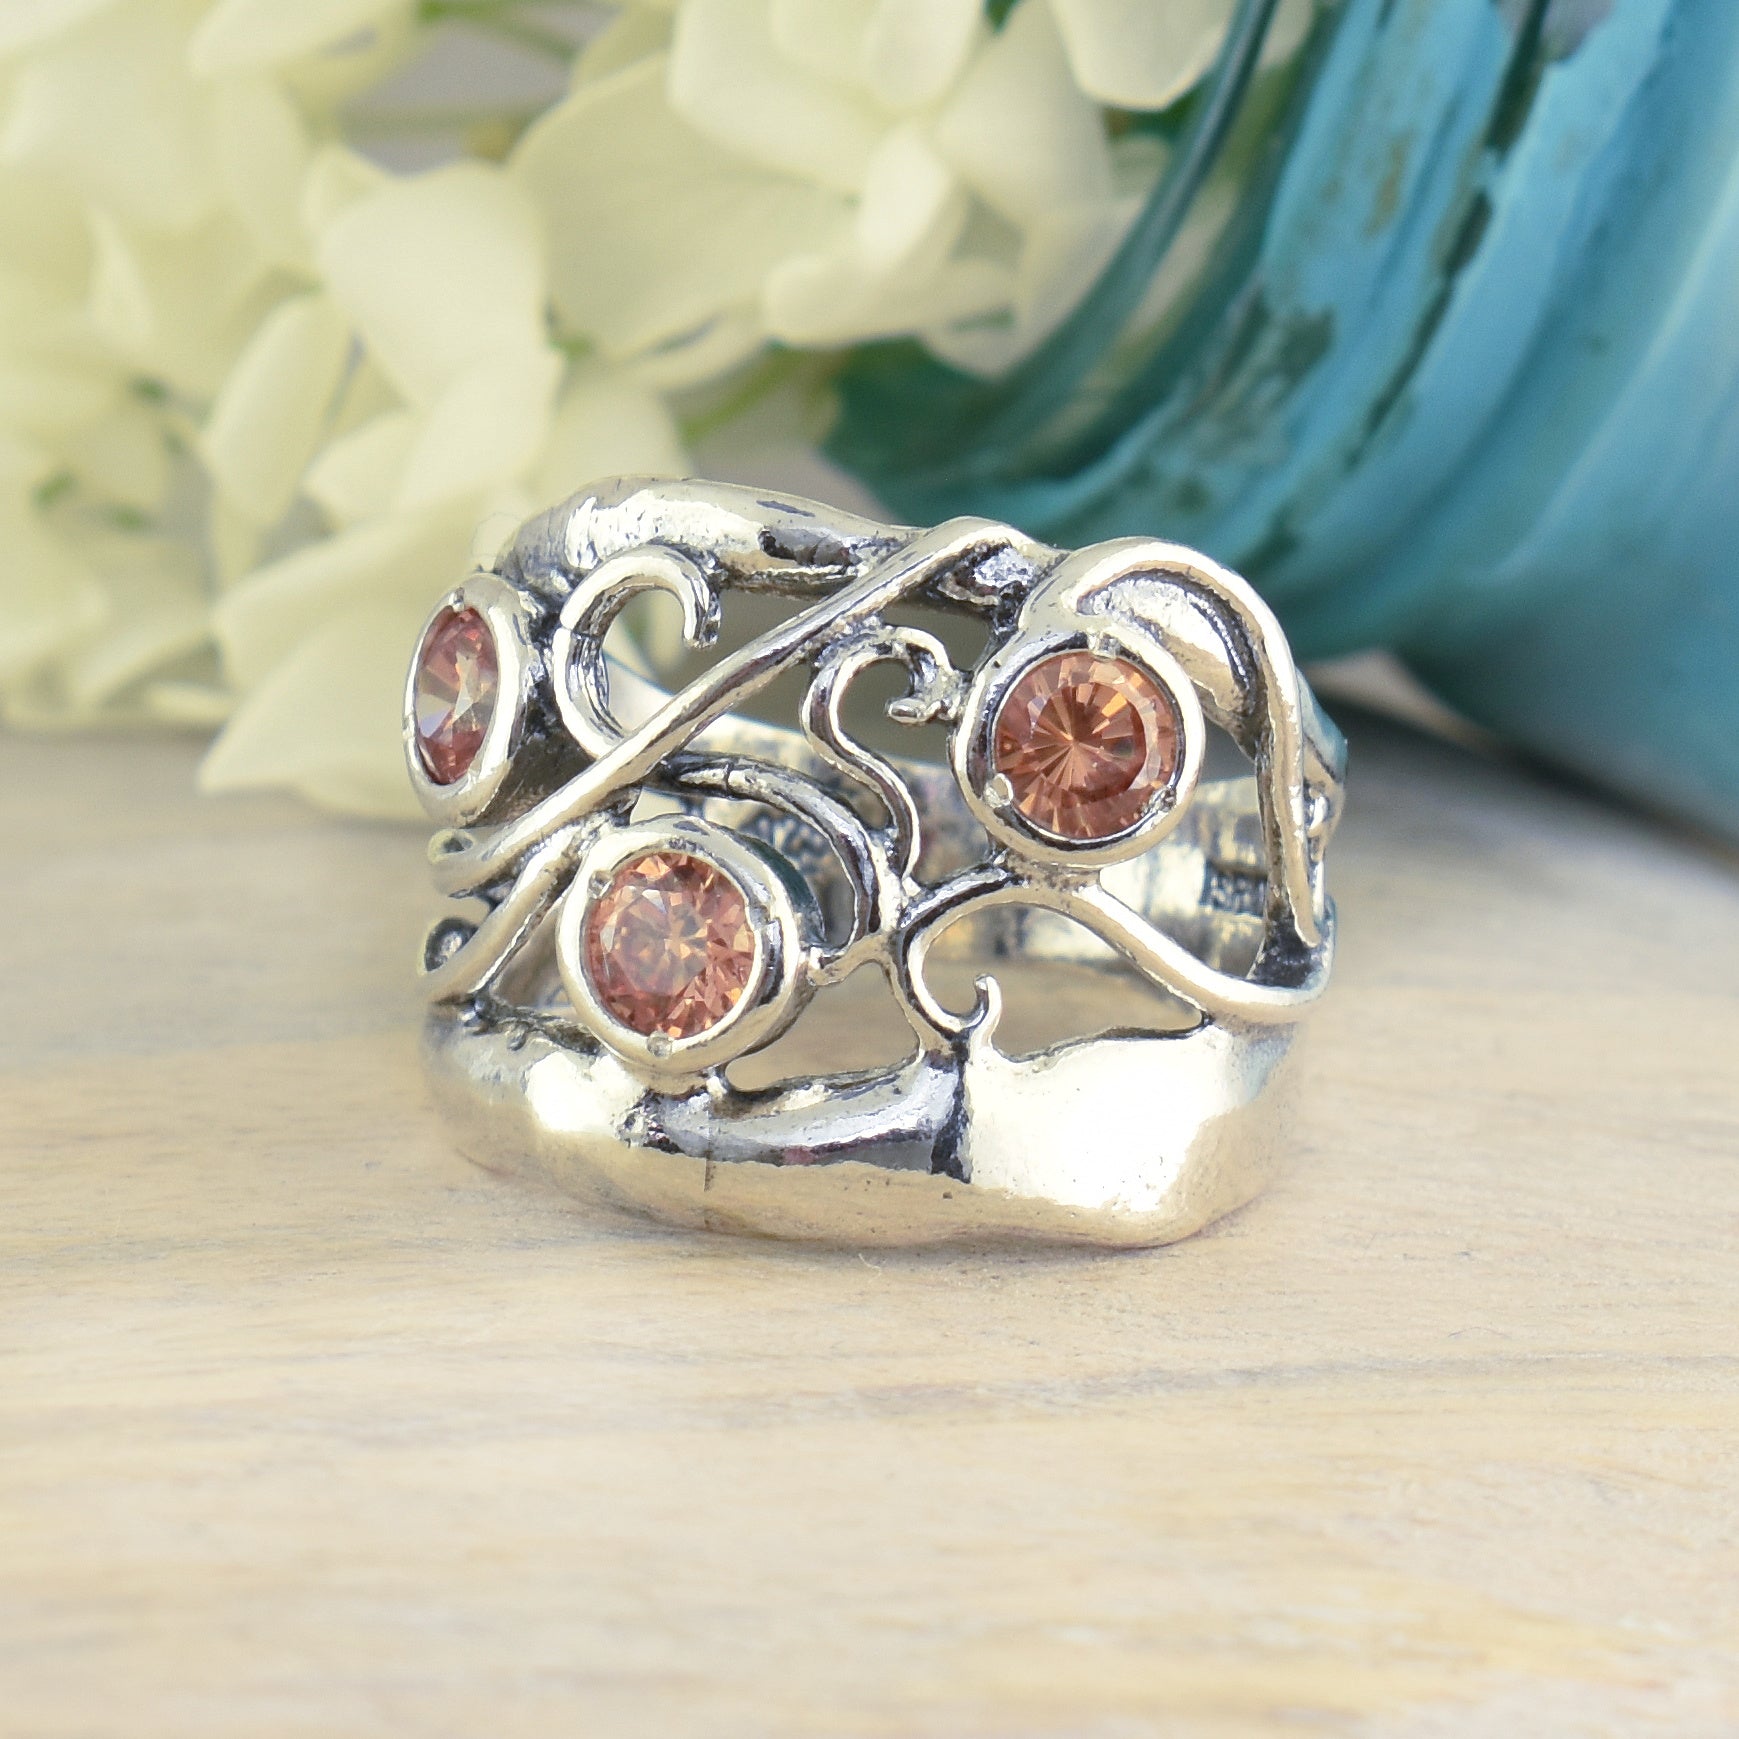 Sunlit Tide Ring in sterling silver and goldenrod cz